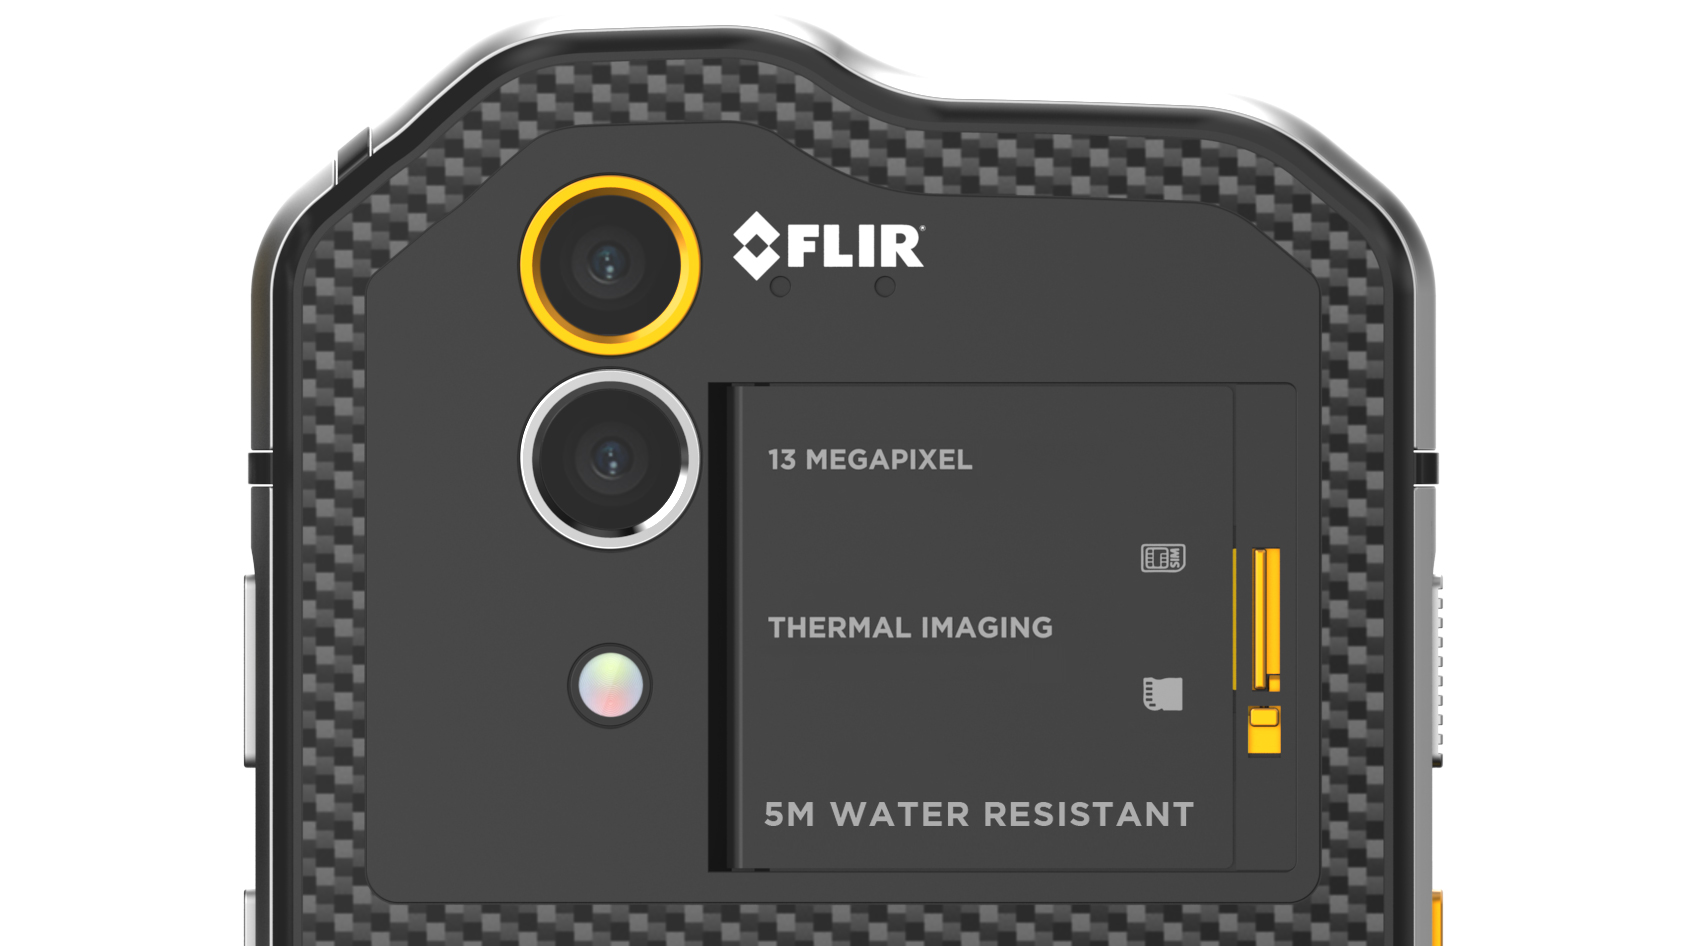 Caterpillar’s New S60 Is The First Smartphone With FLIR Thermal Imaging Built Right In